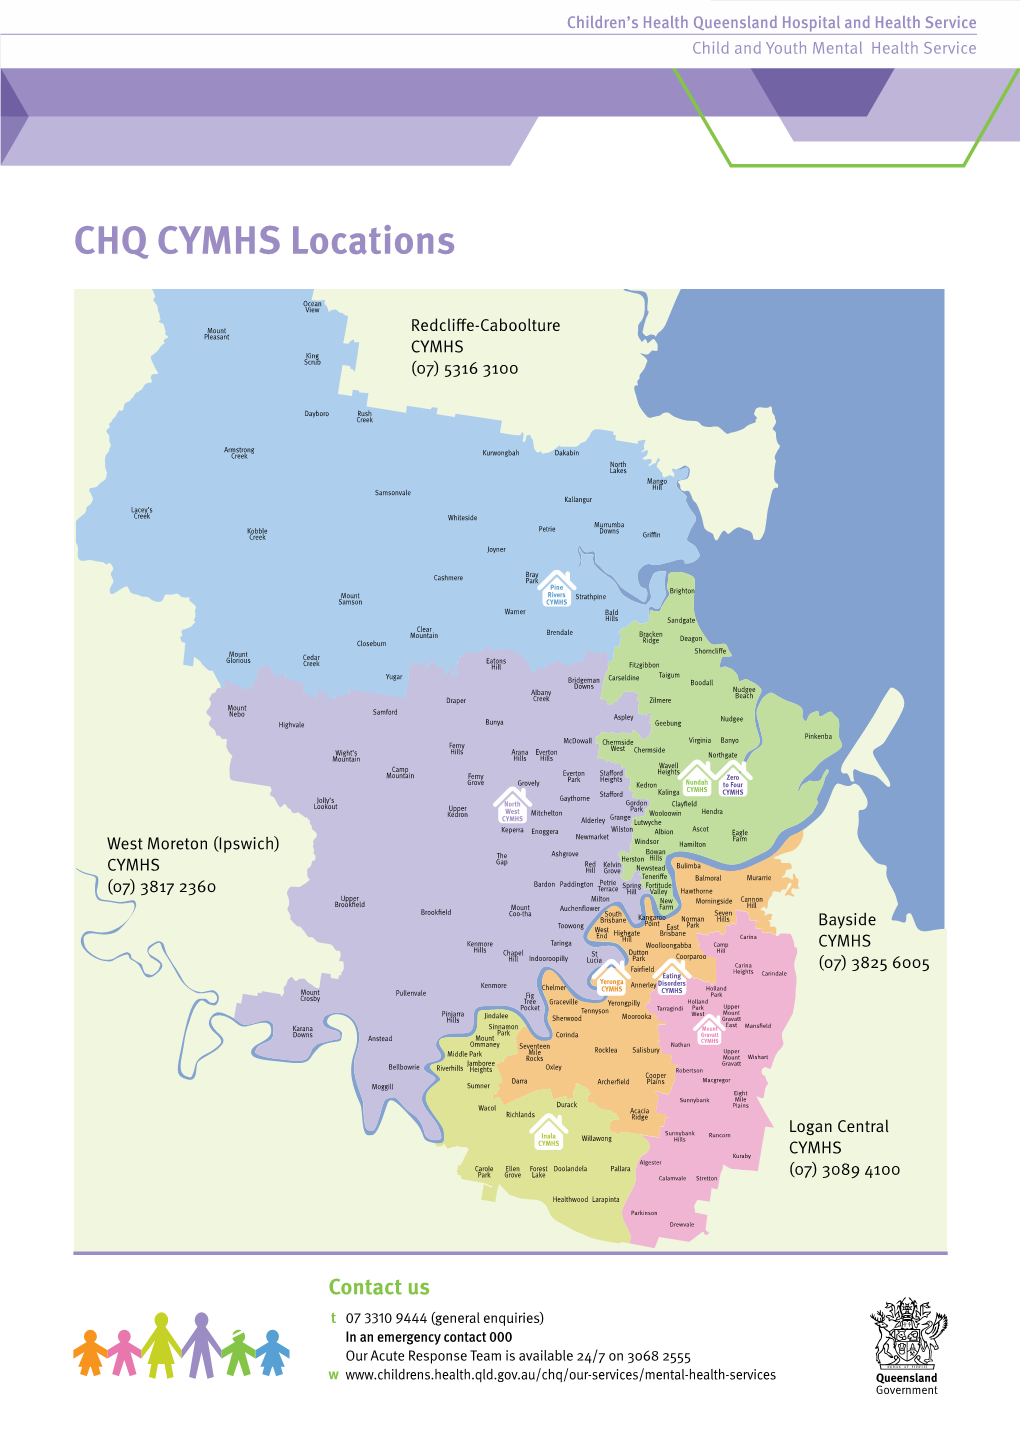 Child and Youth Mental Health Service Locations